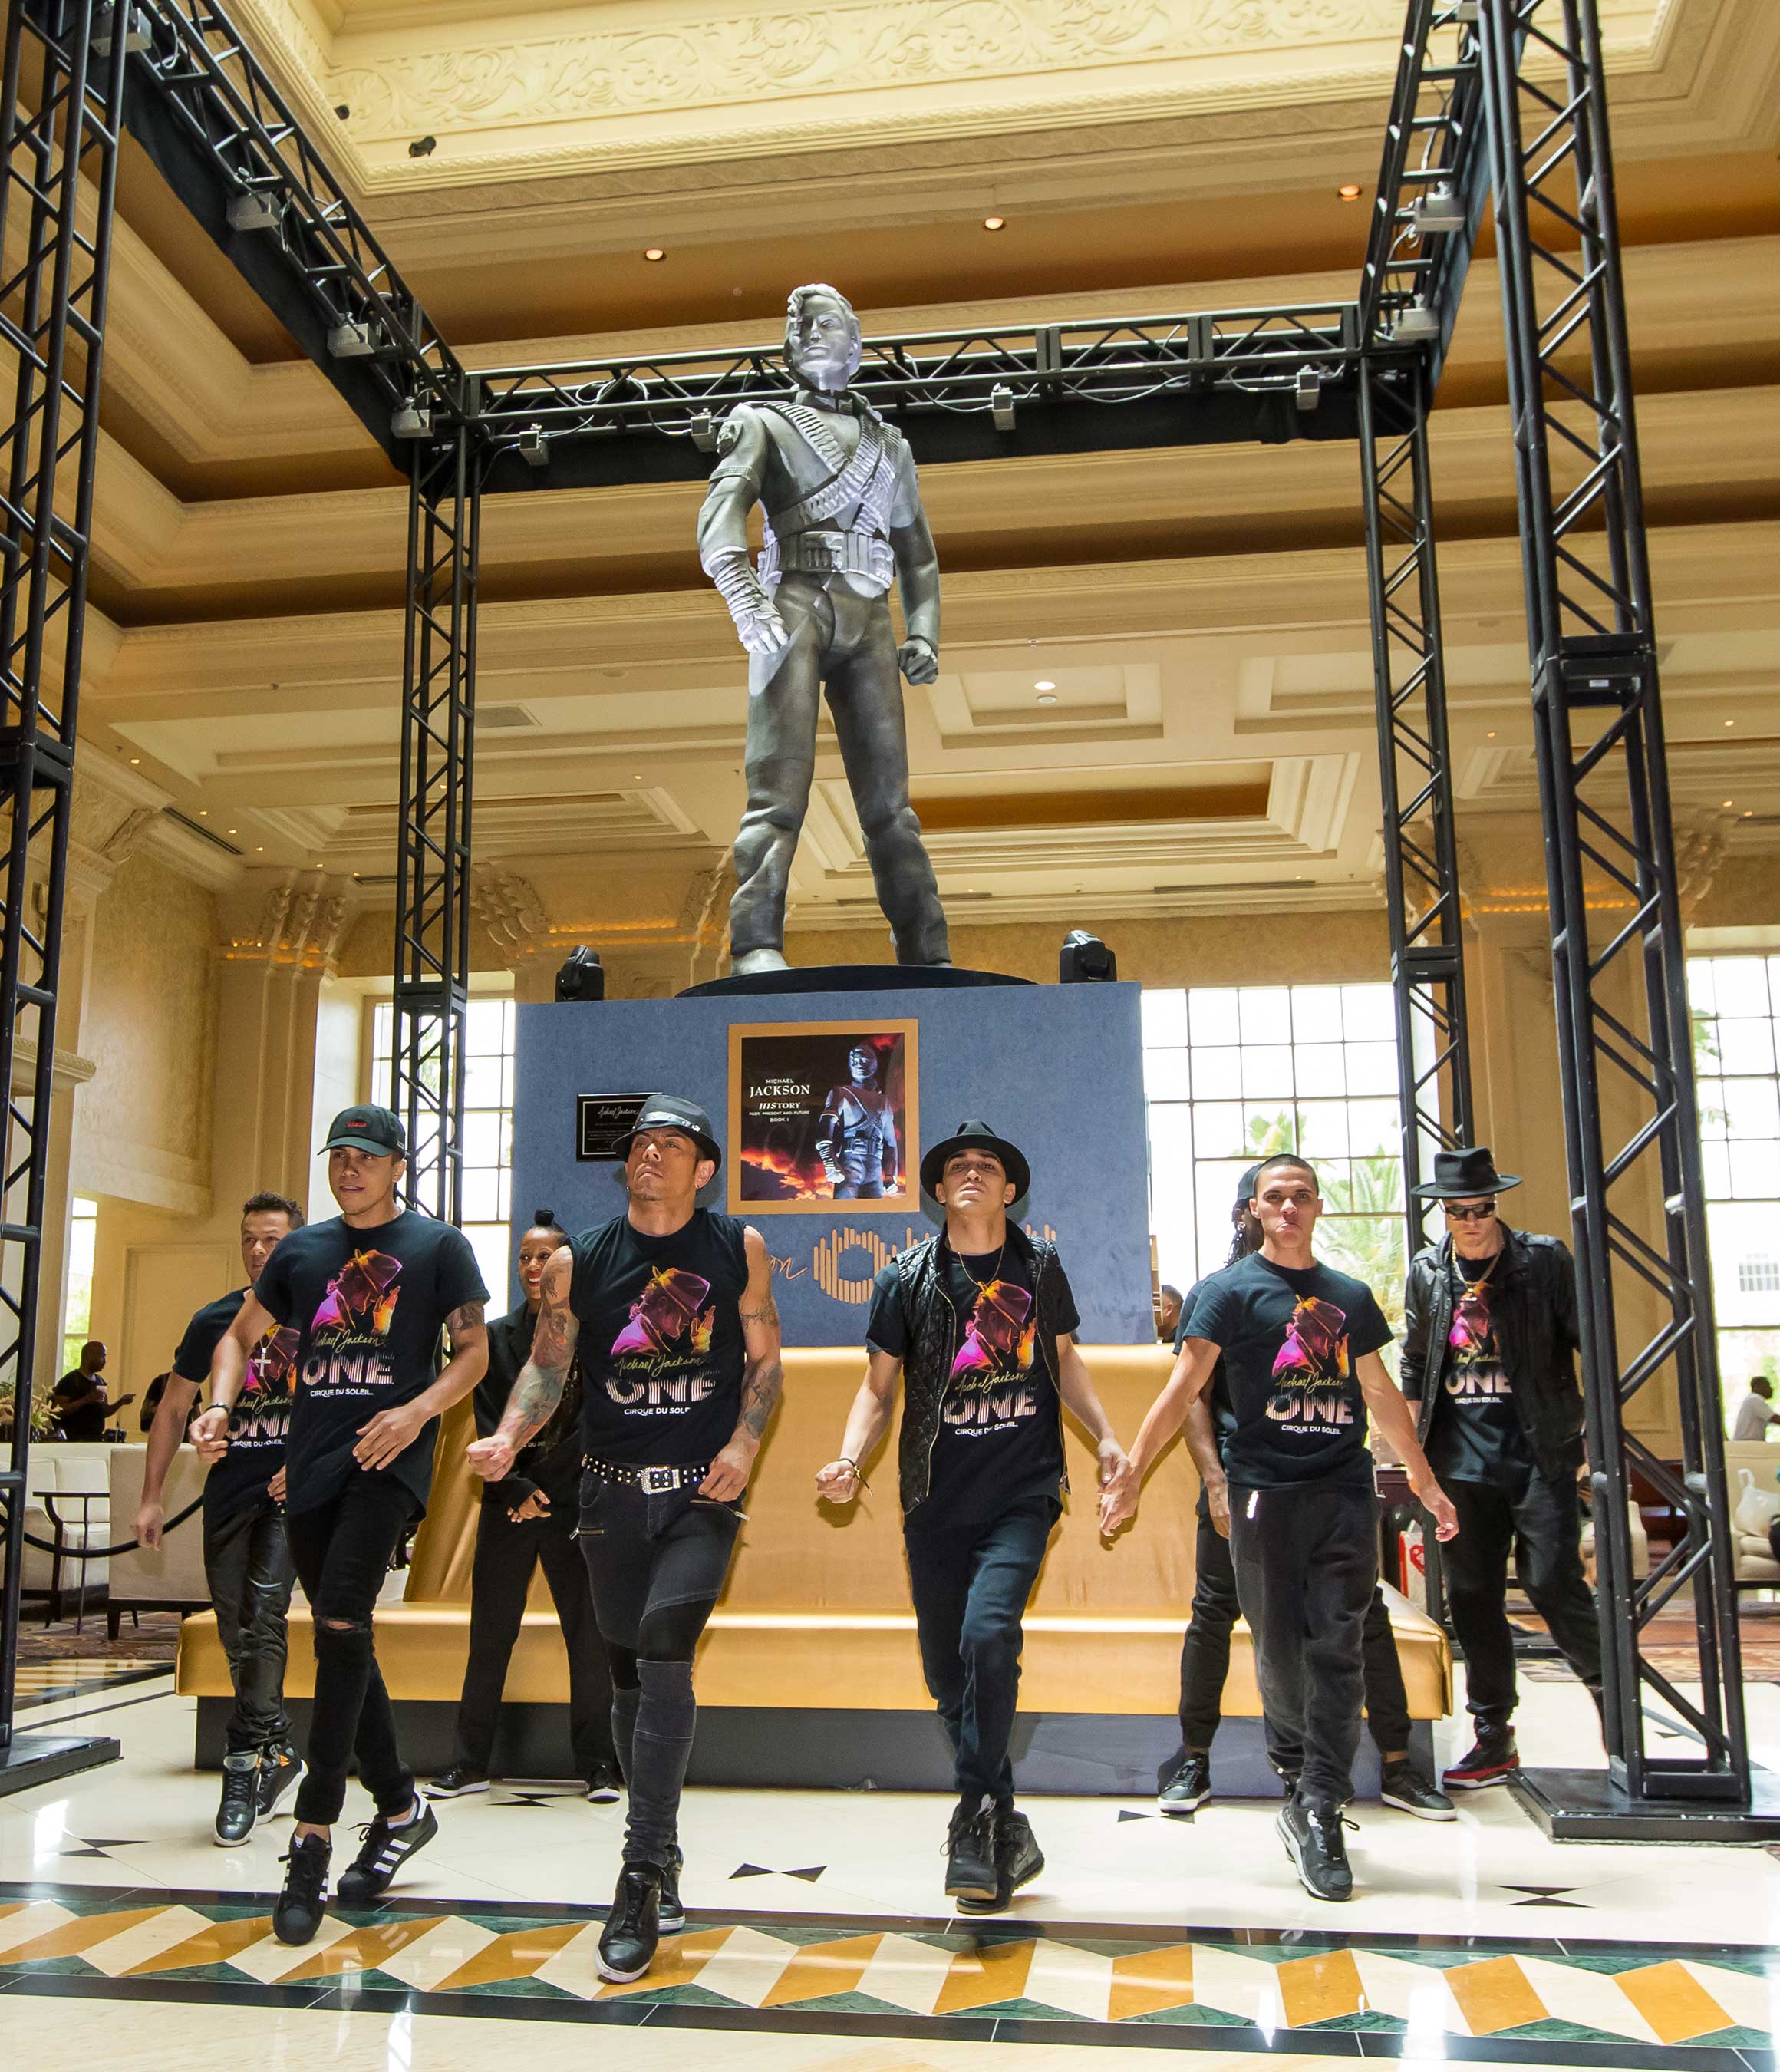 MJ ONE Cast Members Welcome Michael Jackson HIStory Statue